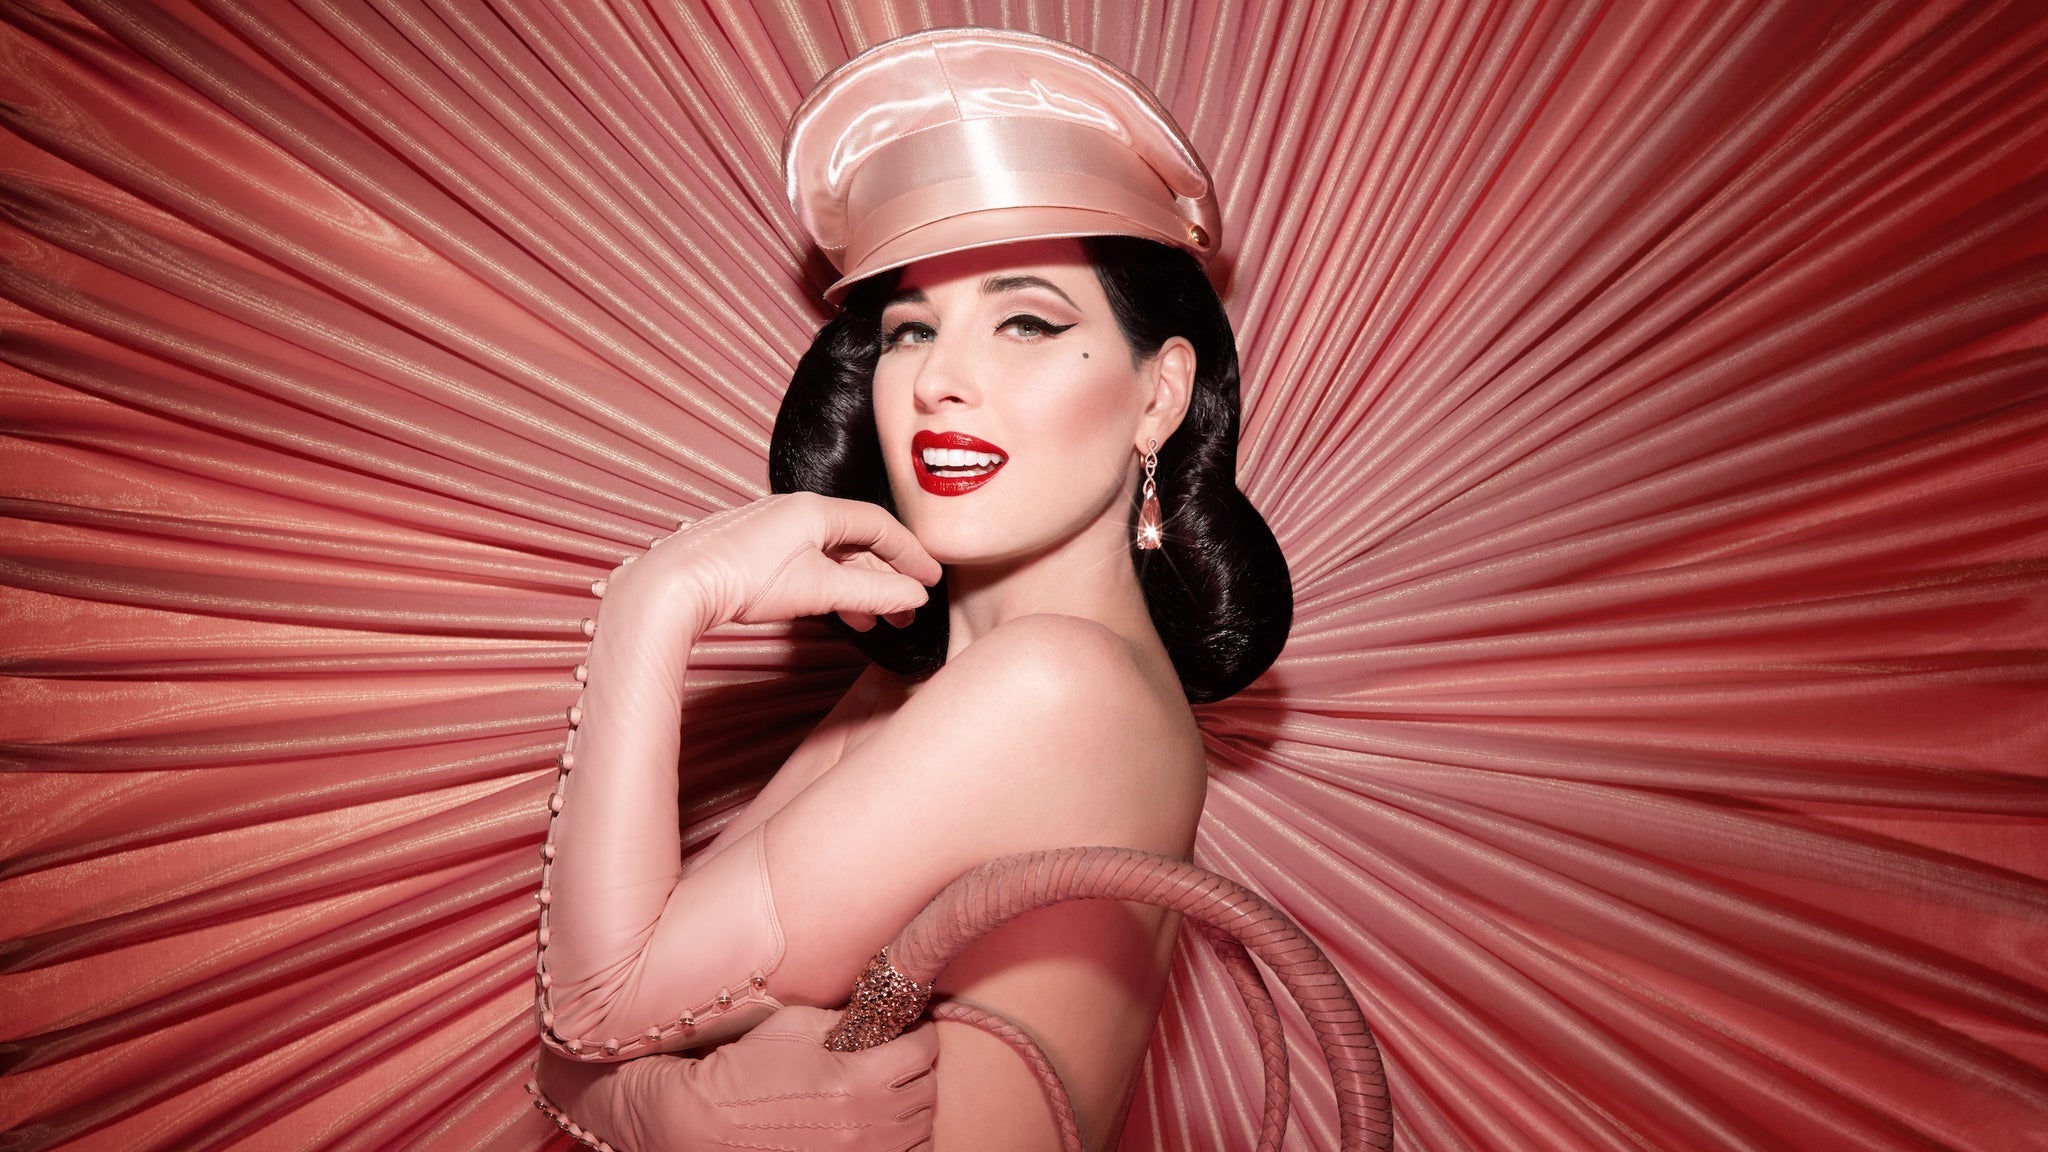 members only presale password for Dita Von Teese: GLAMONATRIX face value tickets in Toronto